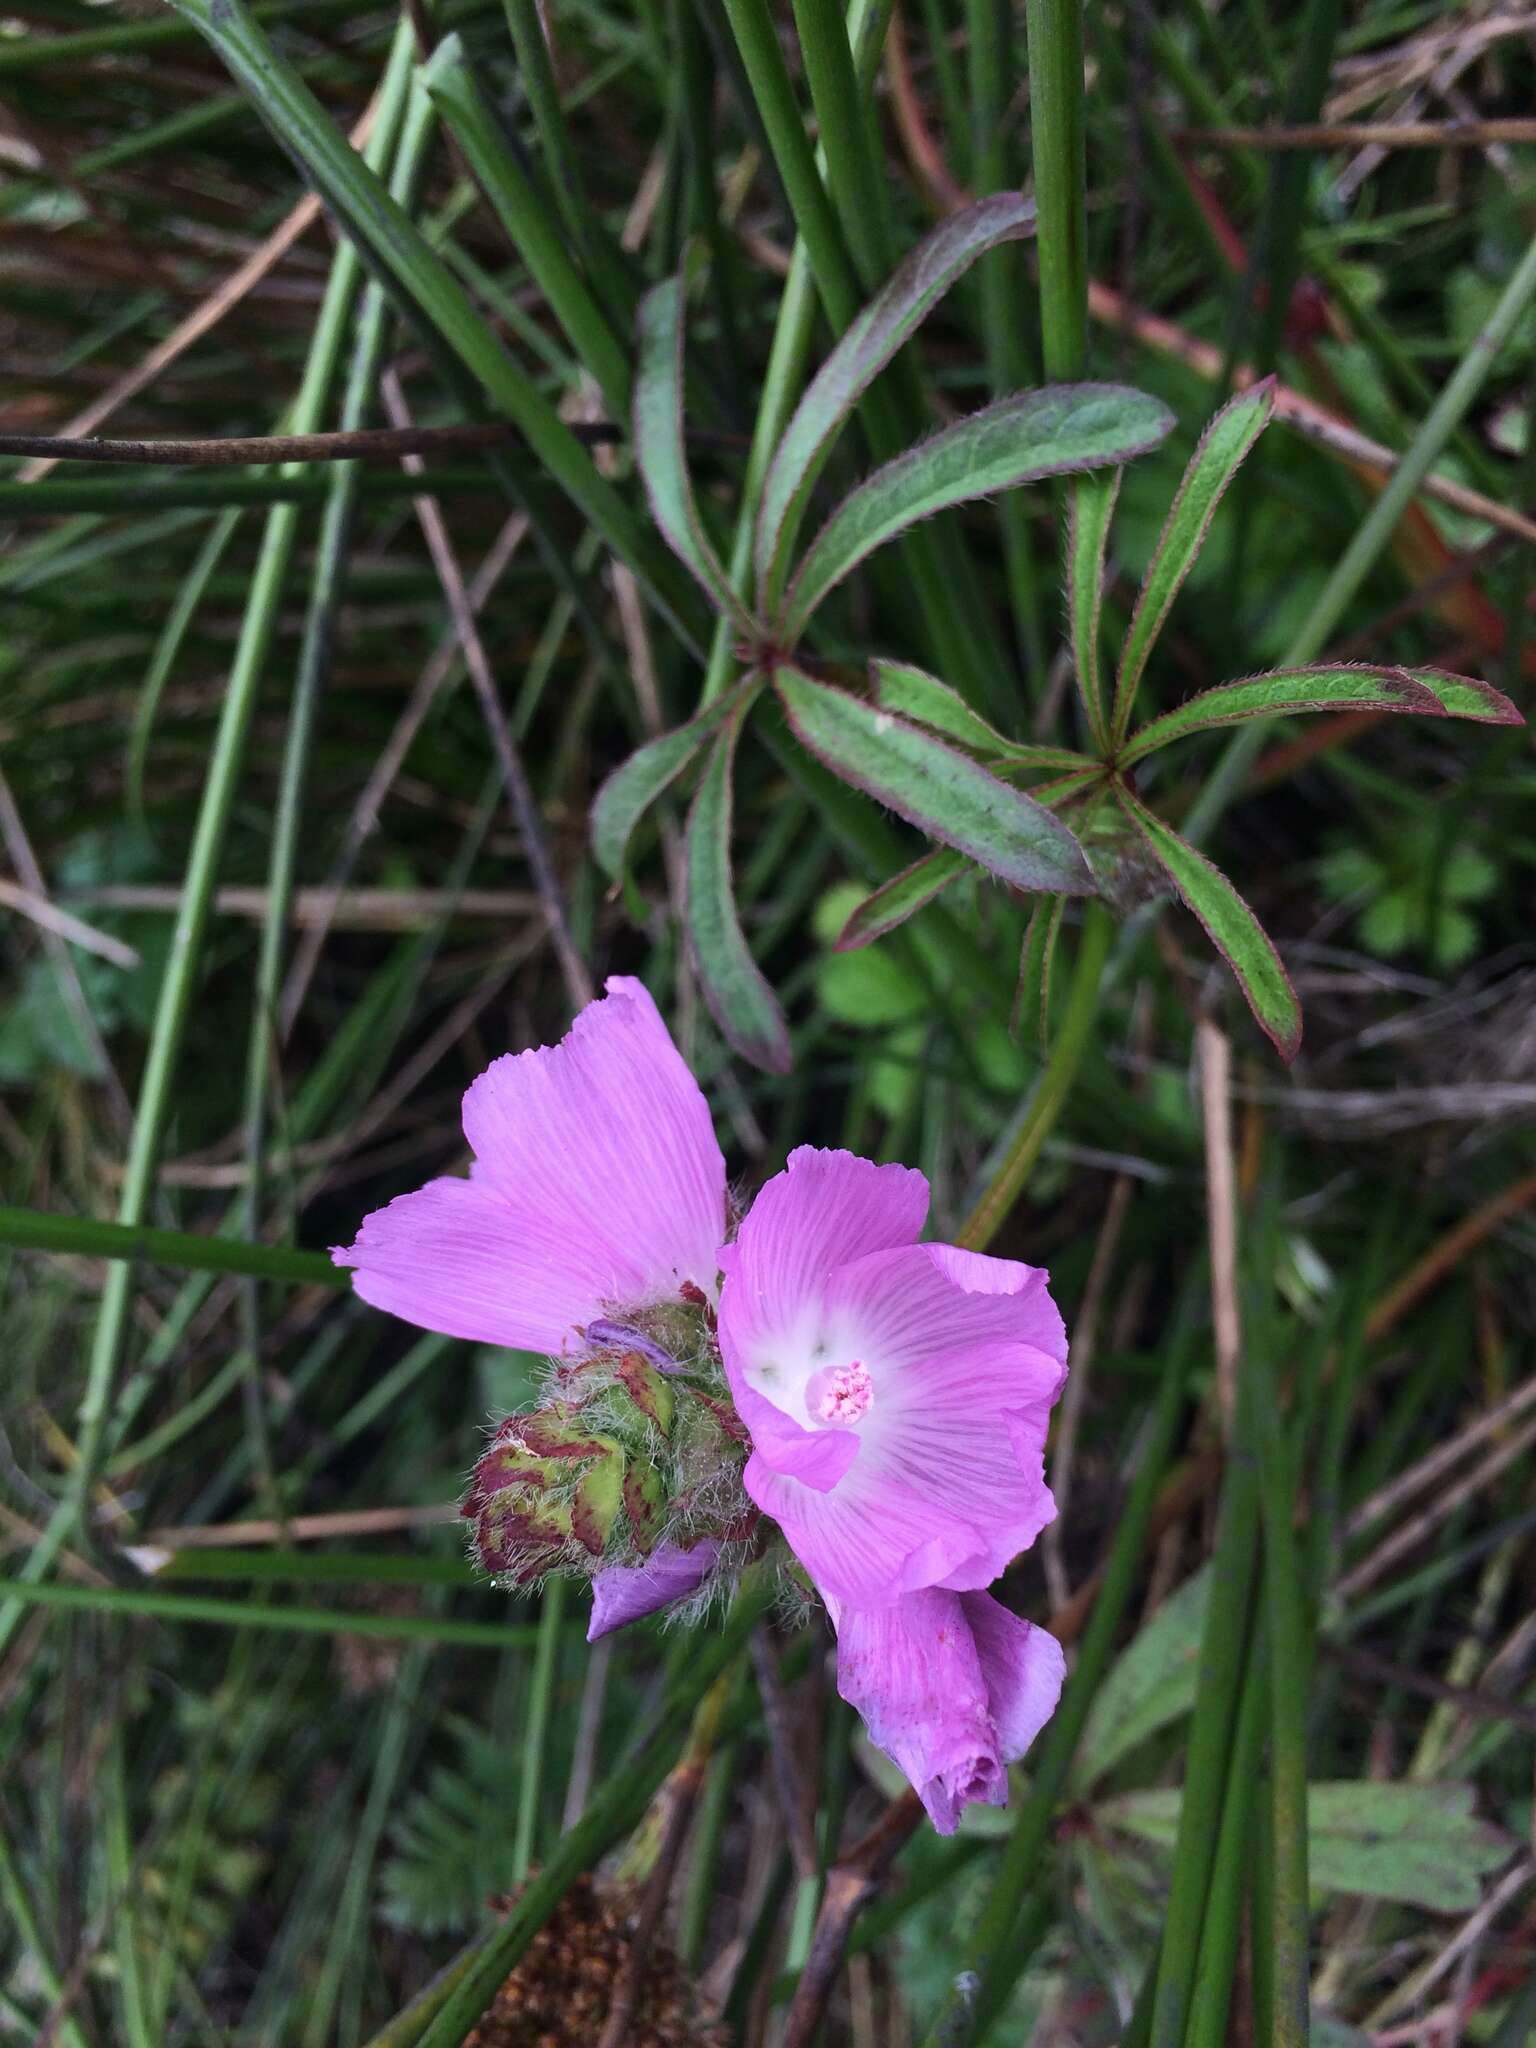 Image of annual checkerbloom